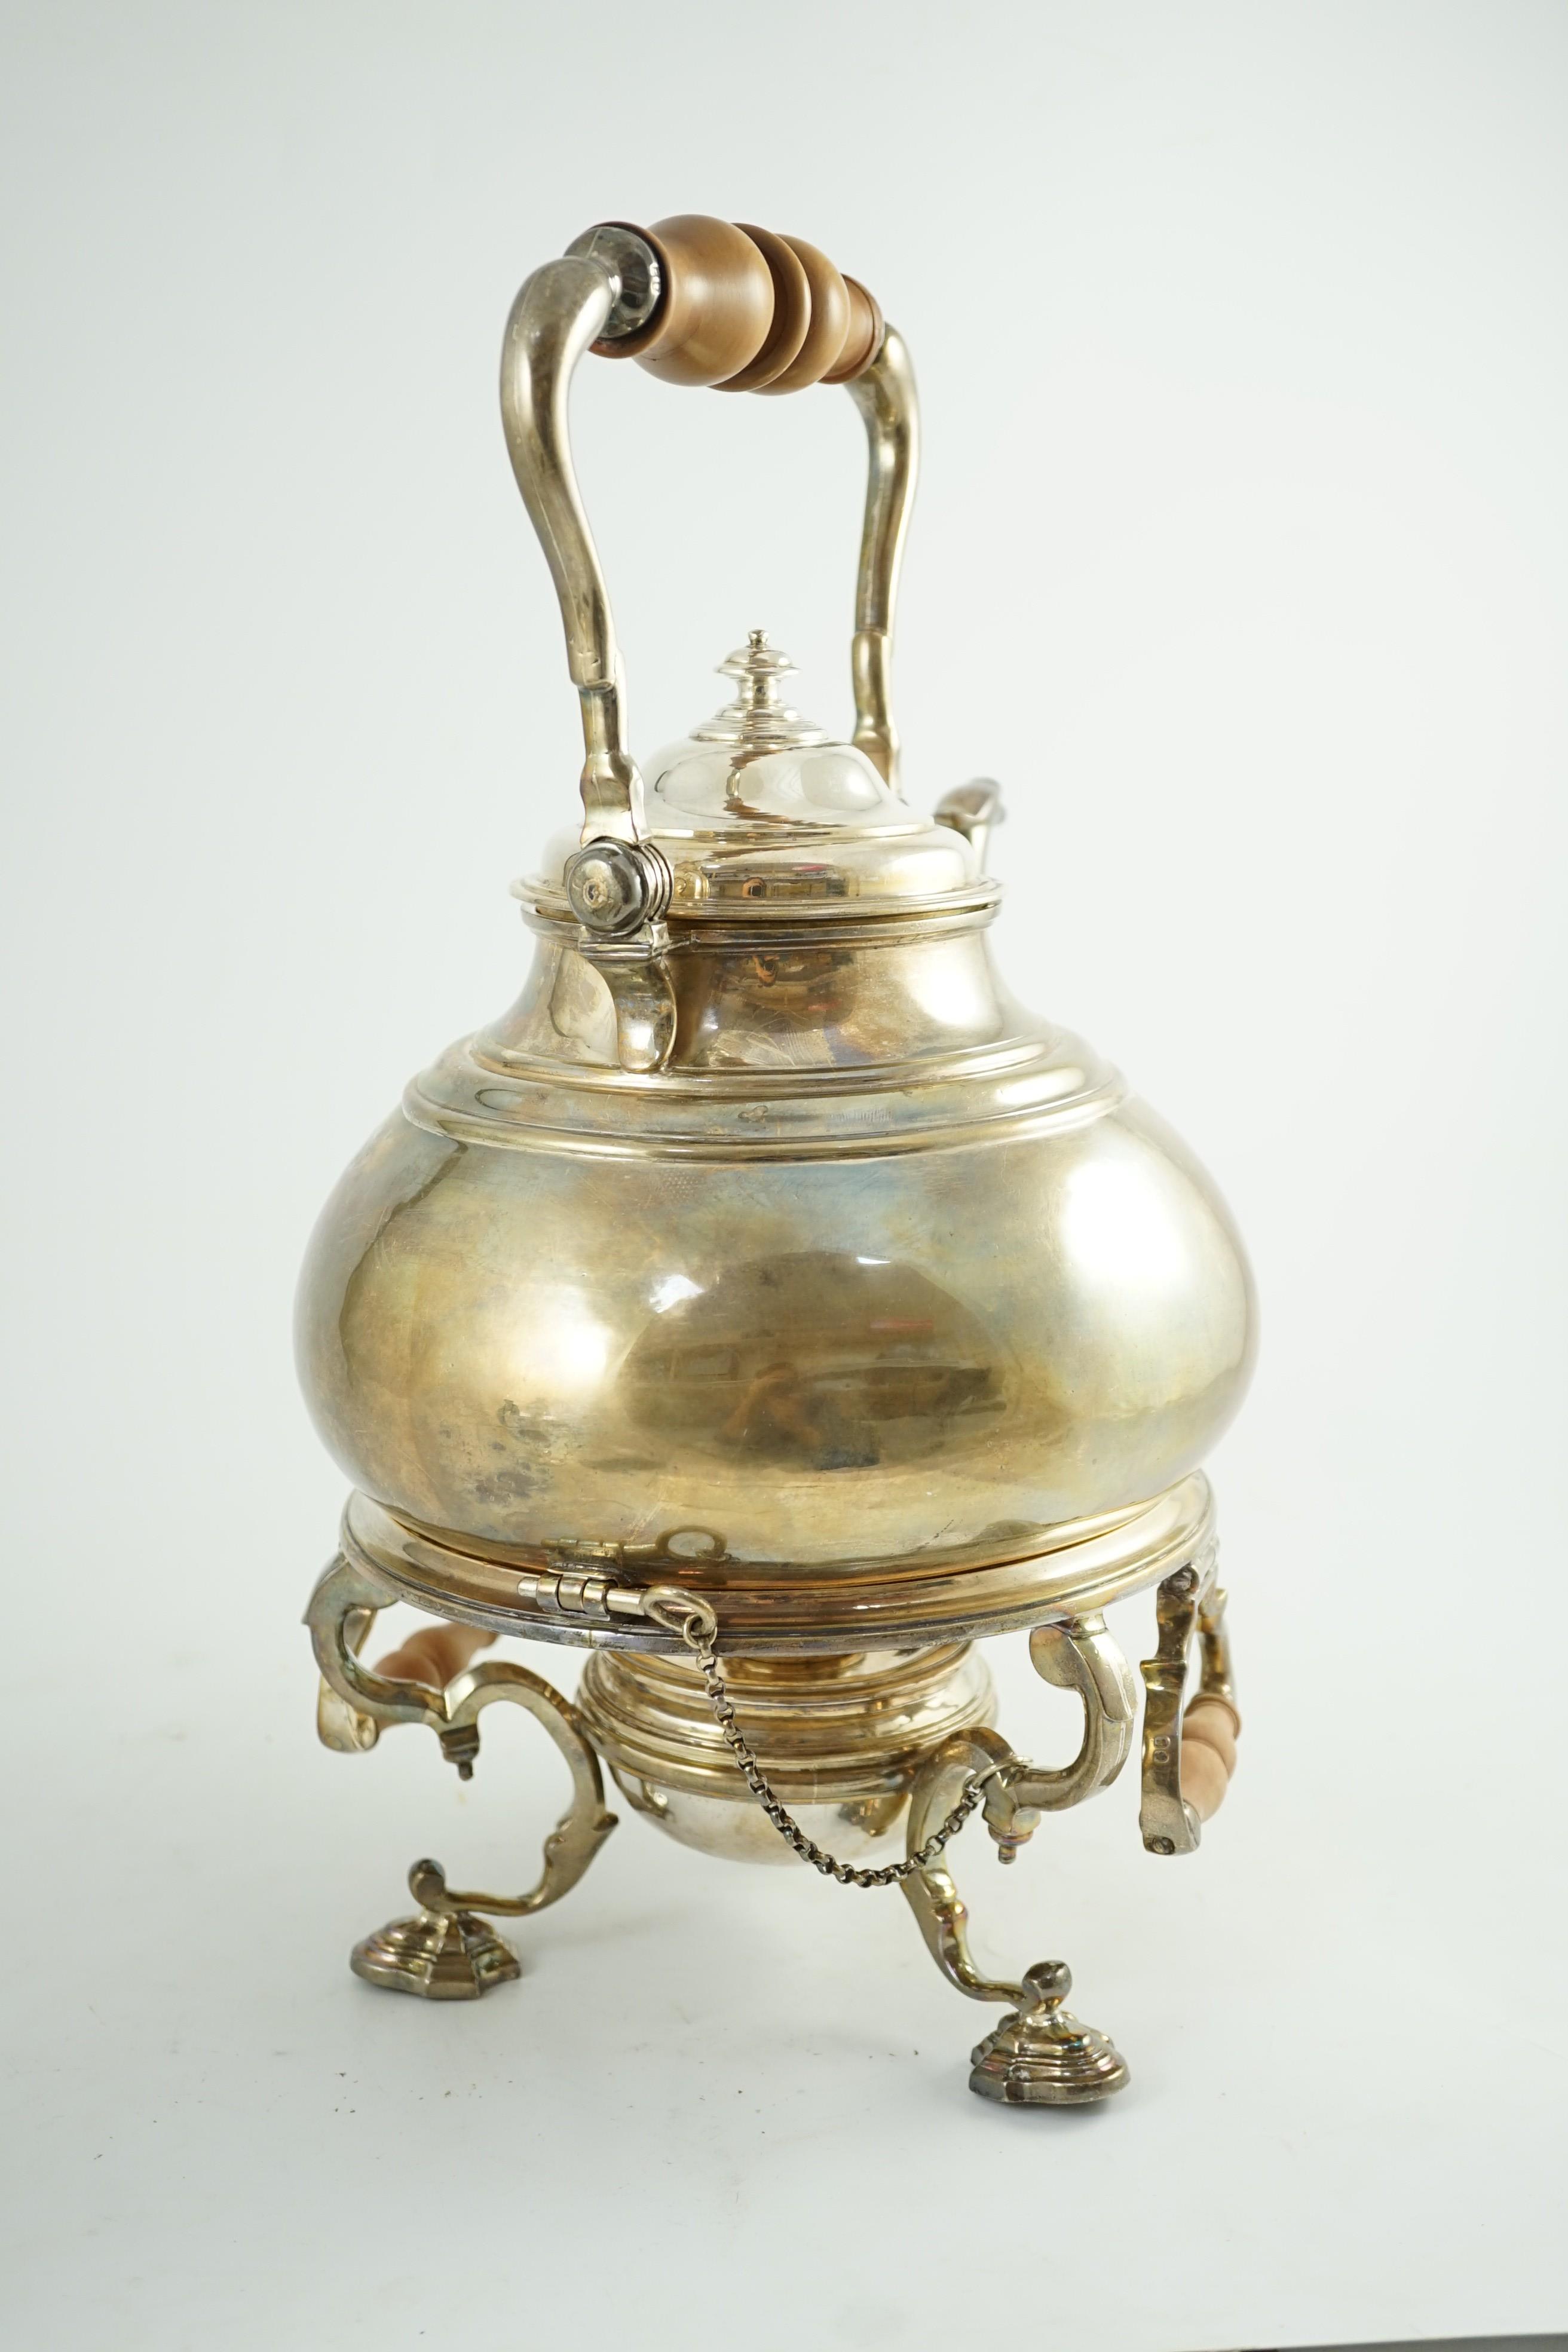 A large George V Britannia standard silver tea kettle on two handled stand, with burner, by - Image 6 of 6